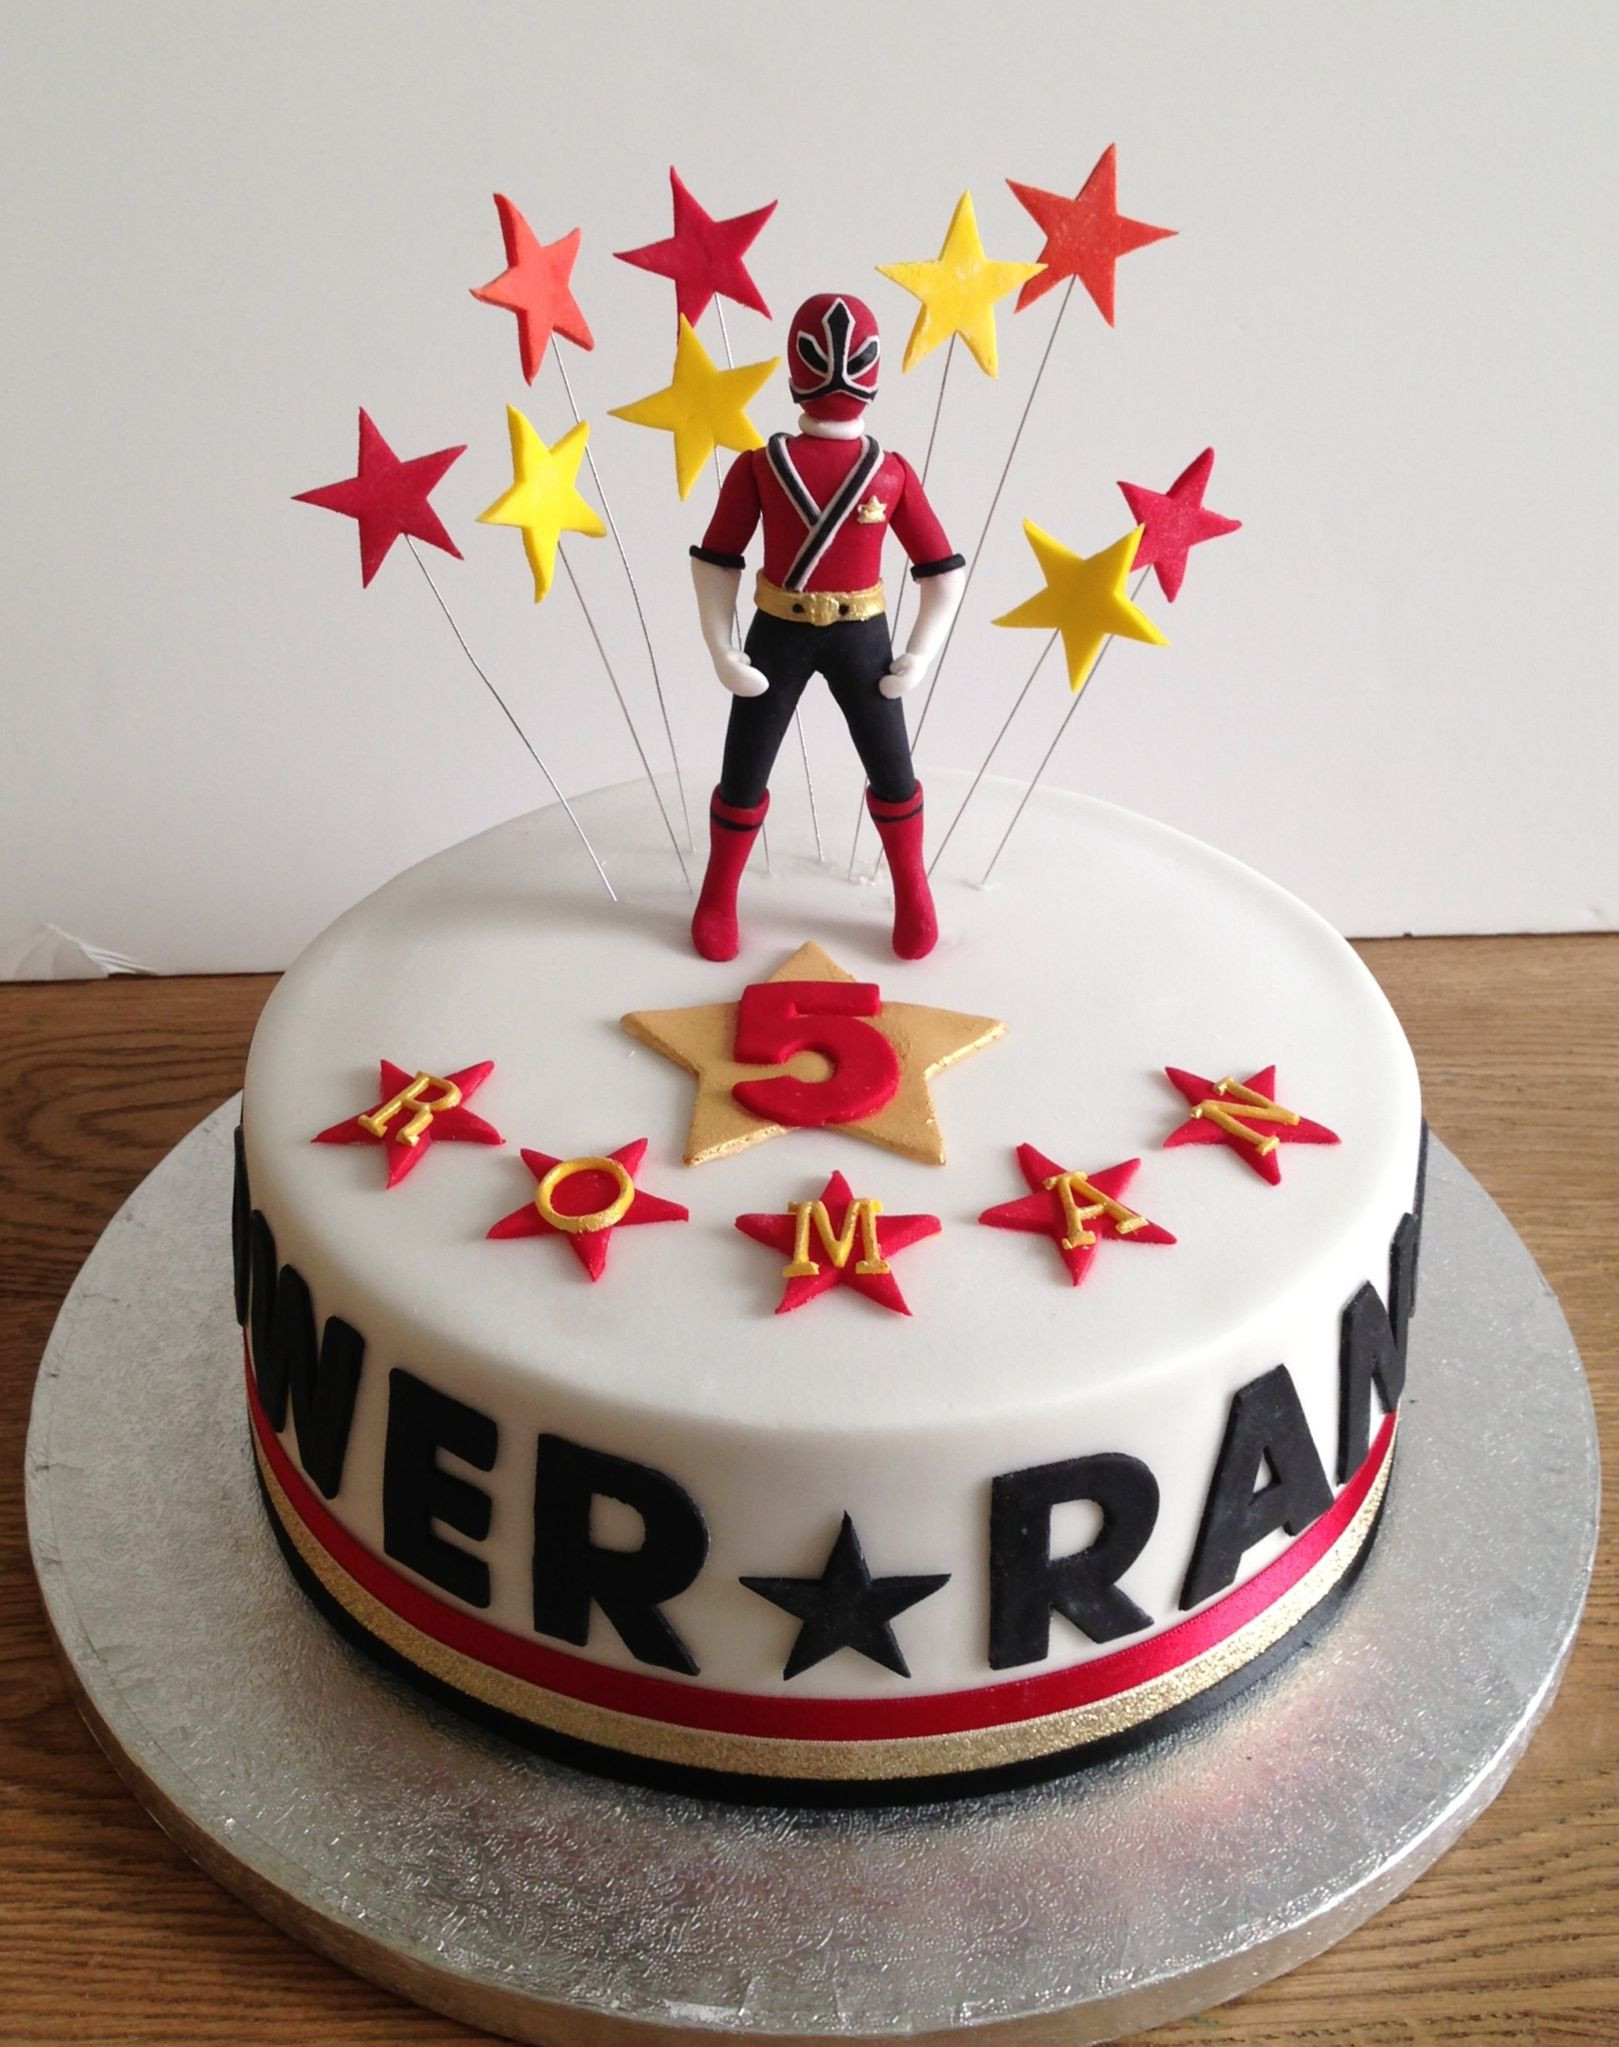 Power Ranger Birthday Cakes
 Pin by Amber Garland on Victoria s Cake pany